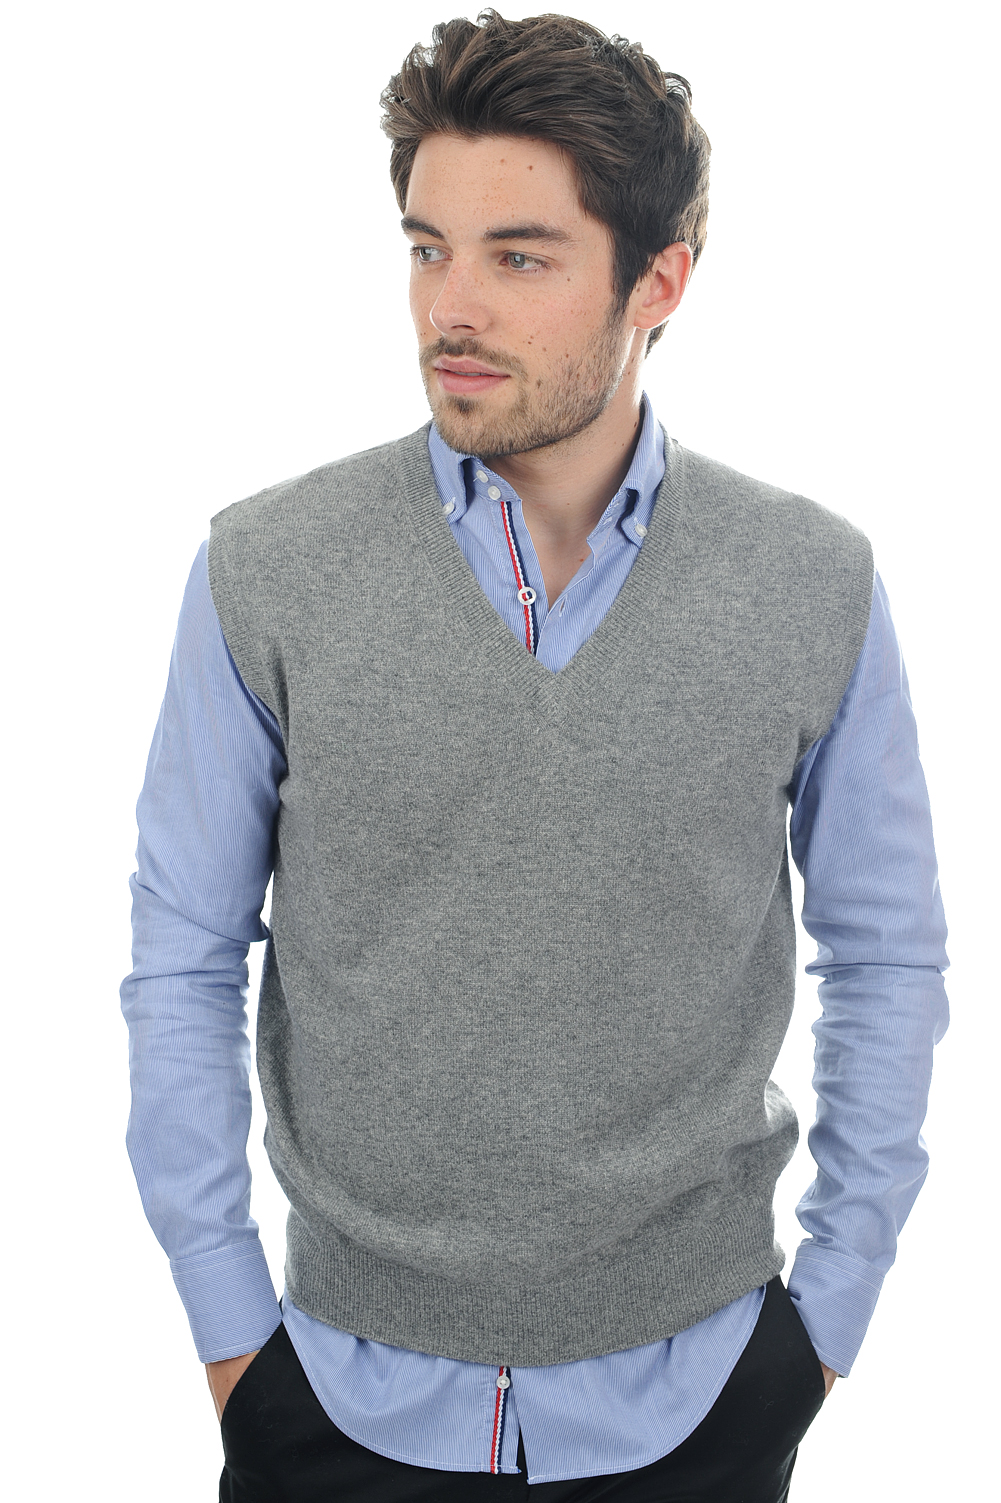 Cachemire pull homme col v balthazar gris chine xl